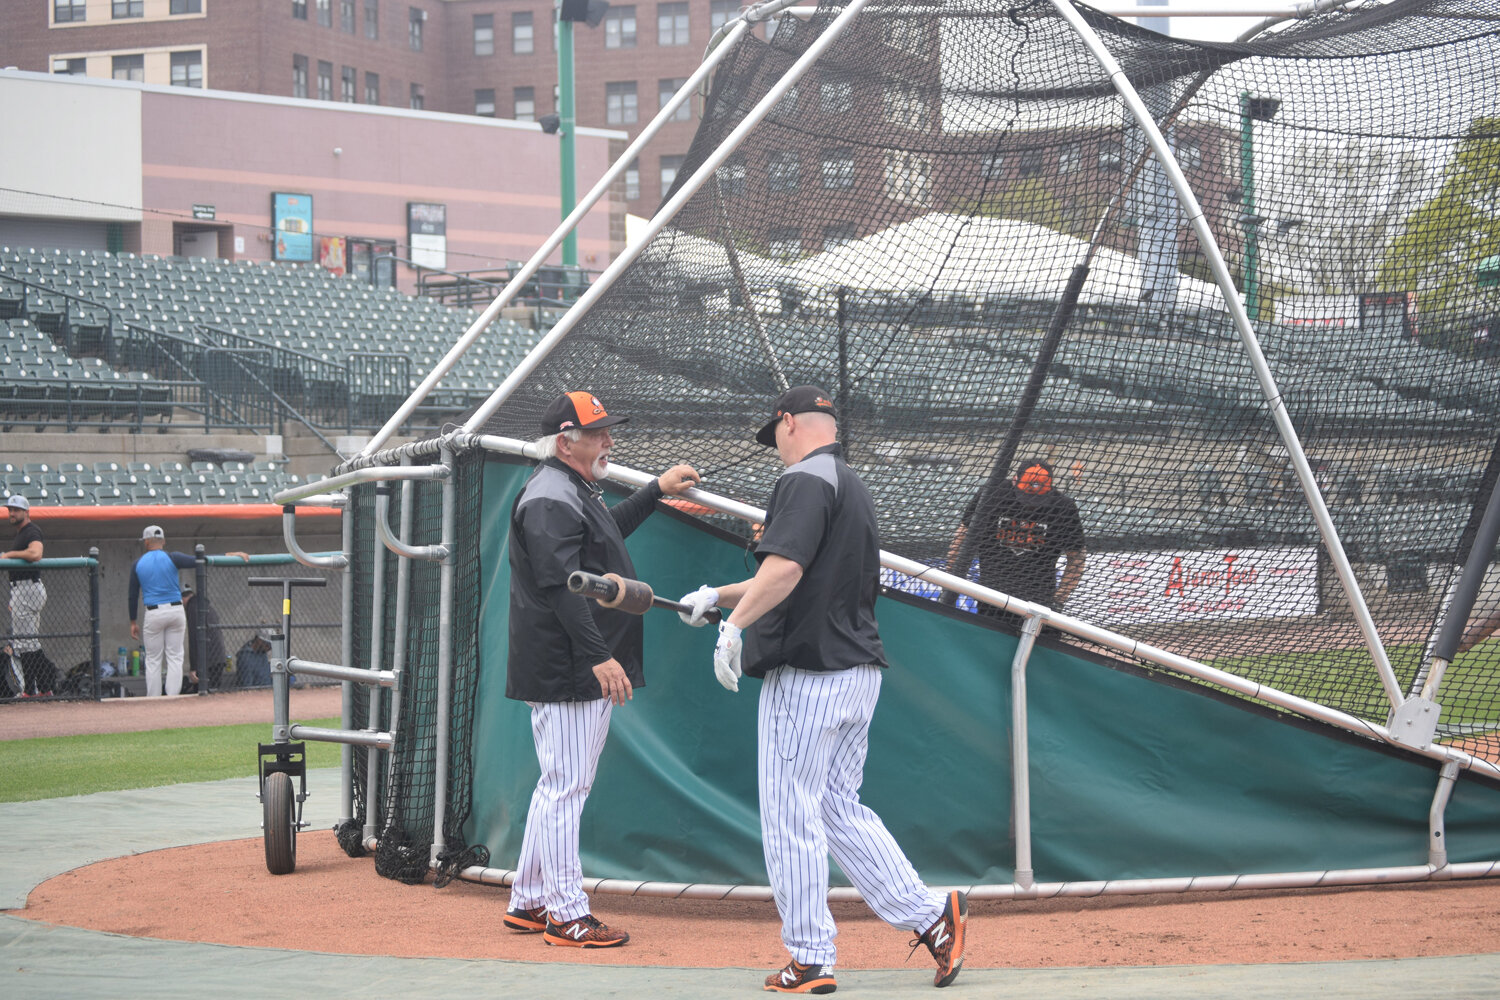 Ducks manager Wally Backman, left, and outfielder/hitting coach Lew Ford talk outside the batting cage